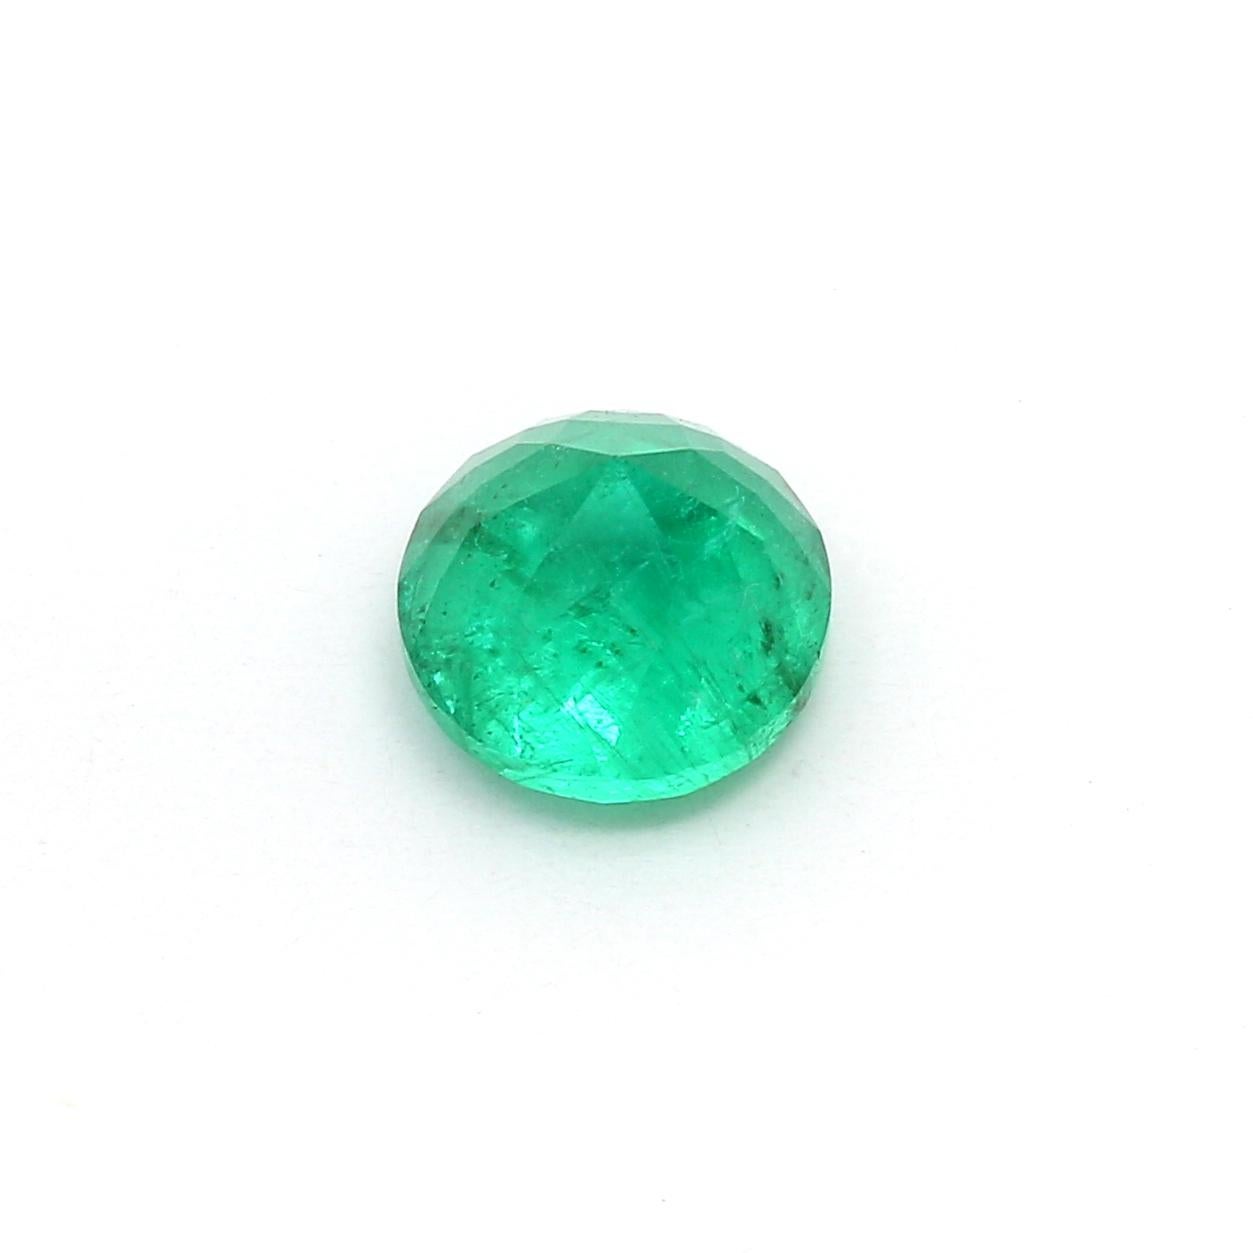 An amazing Russian Emerald which allows jewelers to create a unique piece of wearable art.
This exceptional quality gemstone would make a custom-made jewelry design. Perfect for a Ring or Pendant.

Shape - Round
Weight - 2.05 ct
Treatment - Minor